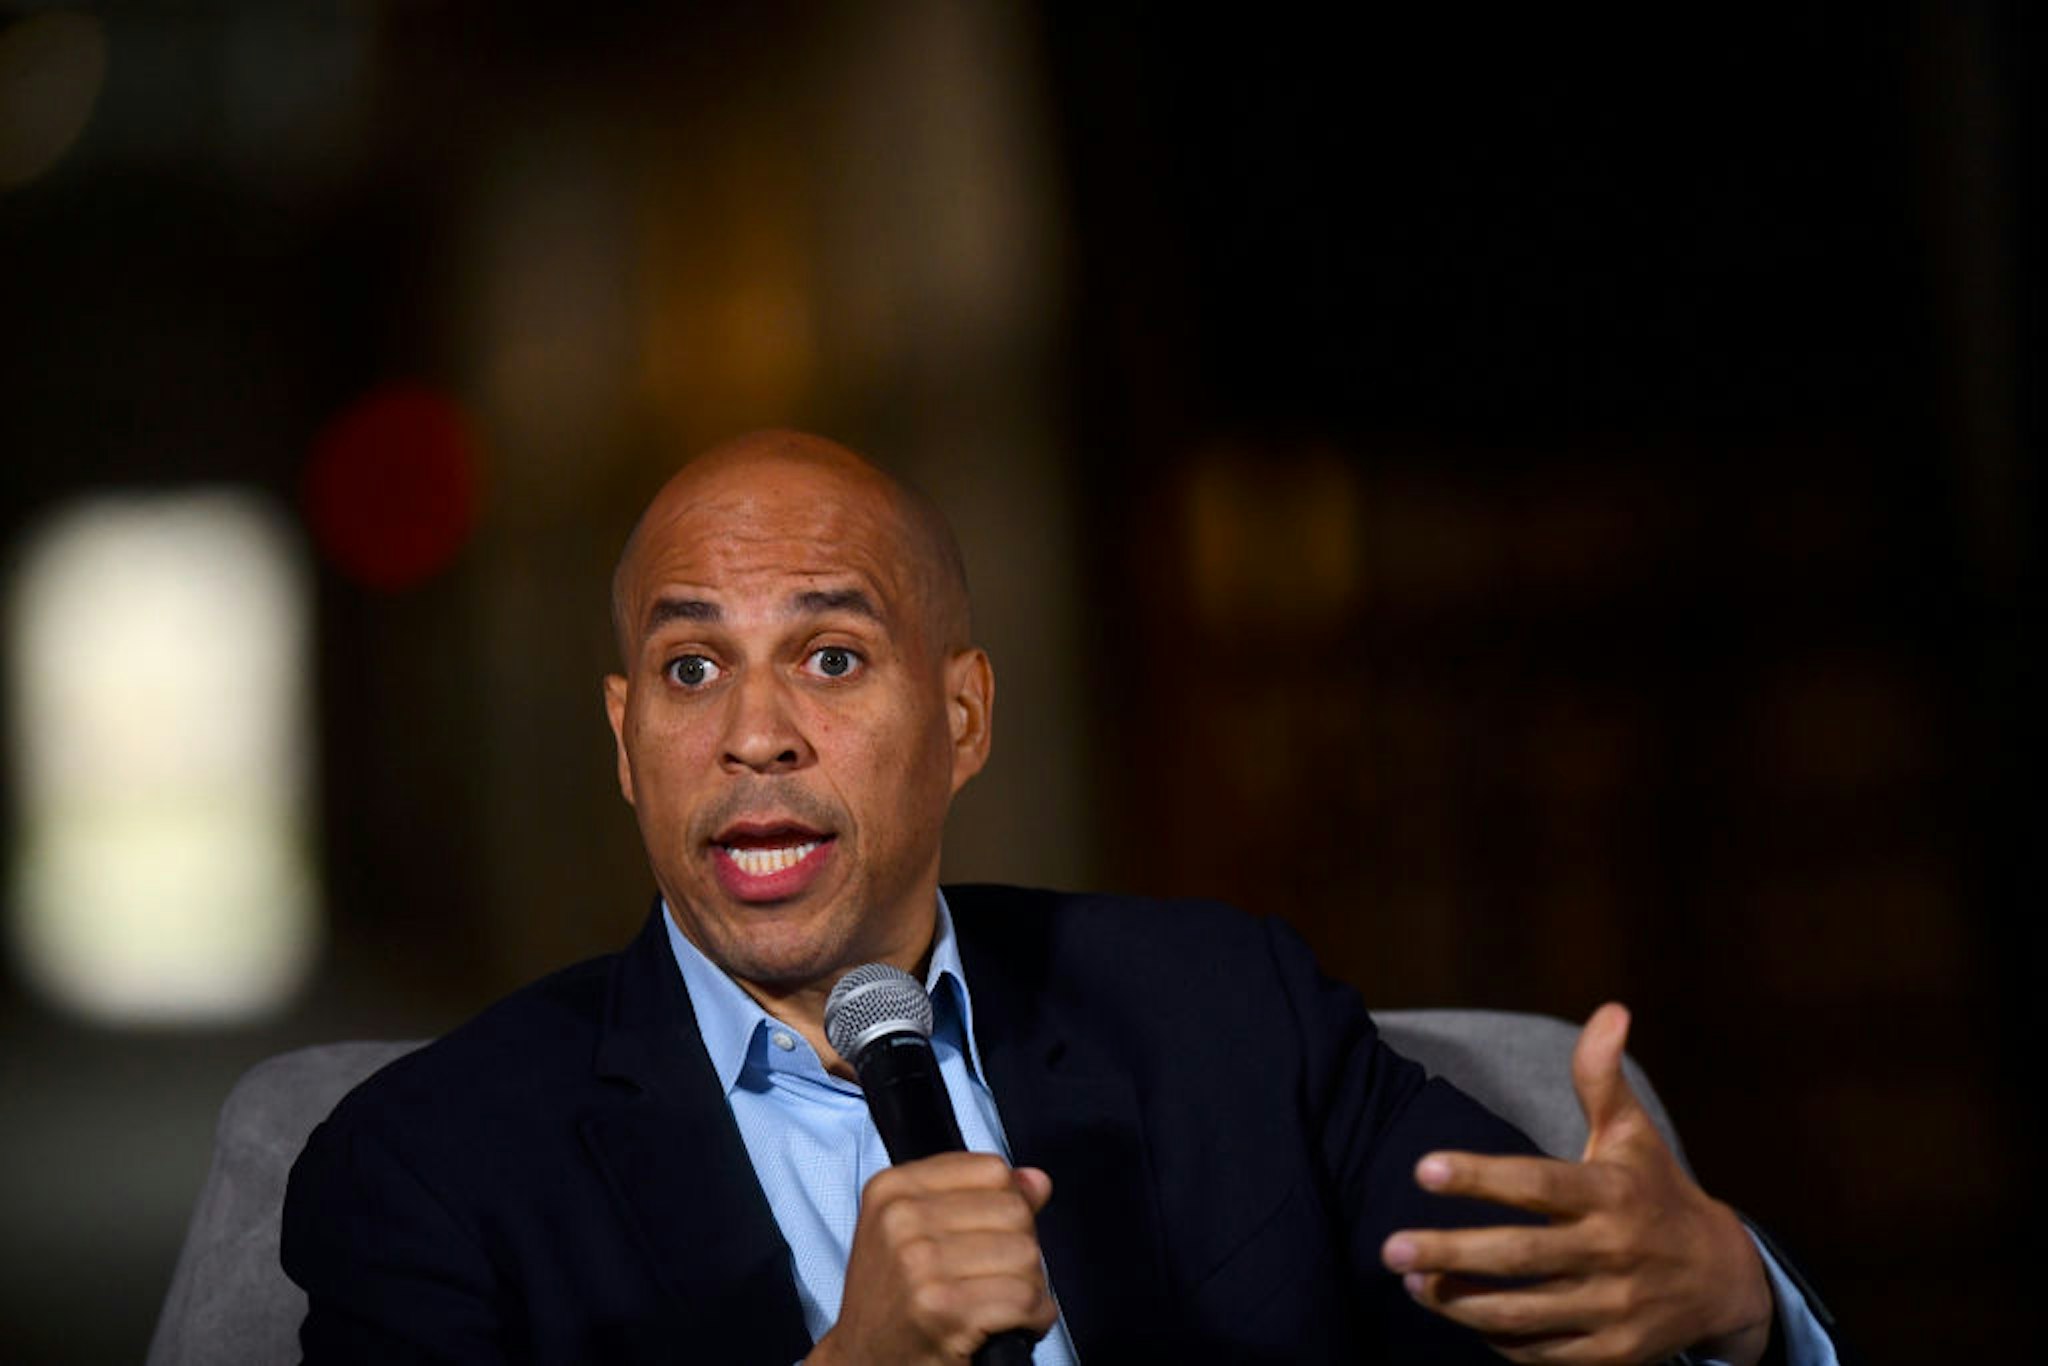 Cory Booker speaks during a town hall at the Eastern State Penitentiary